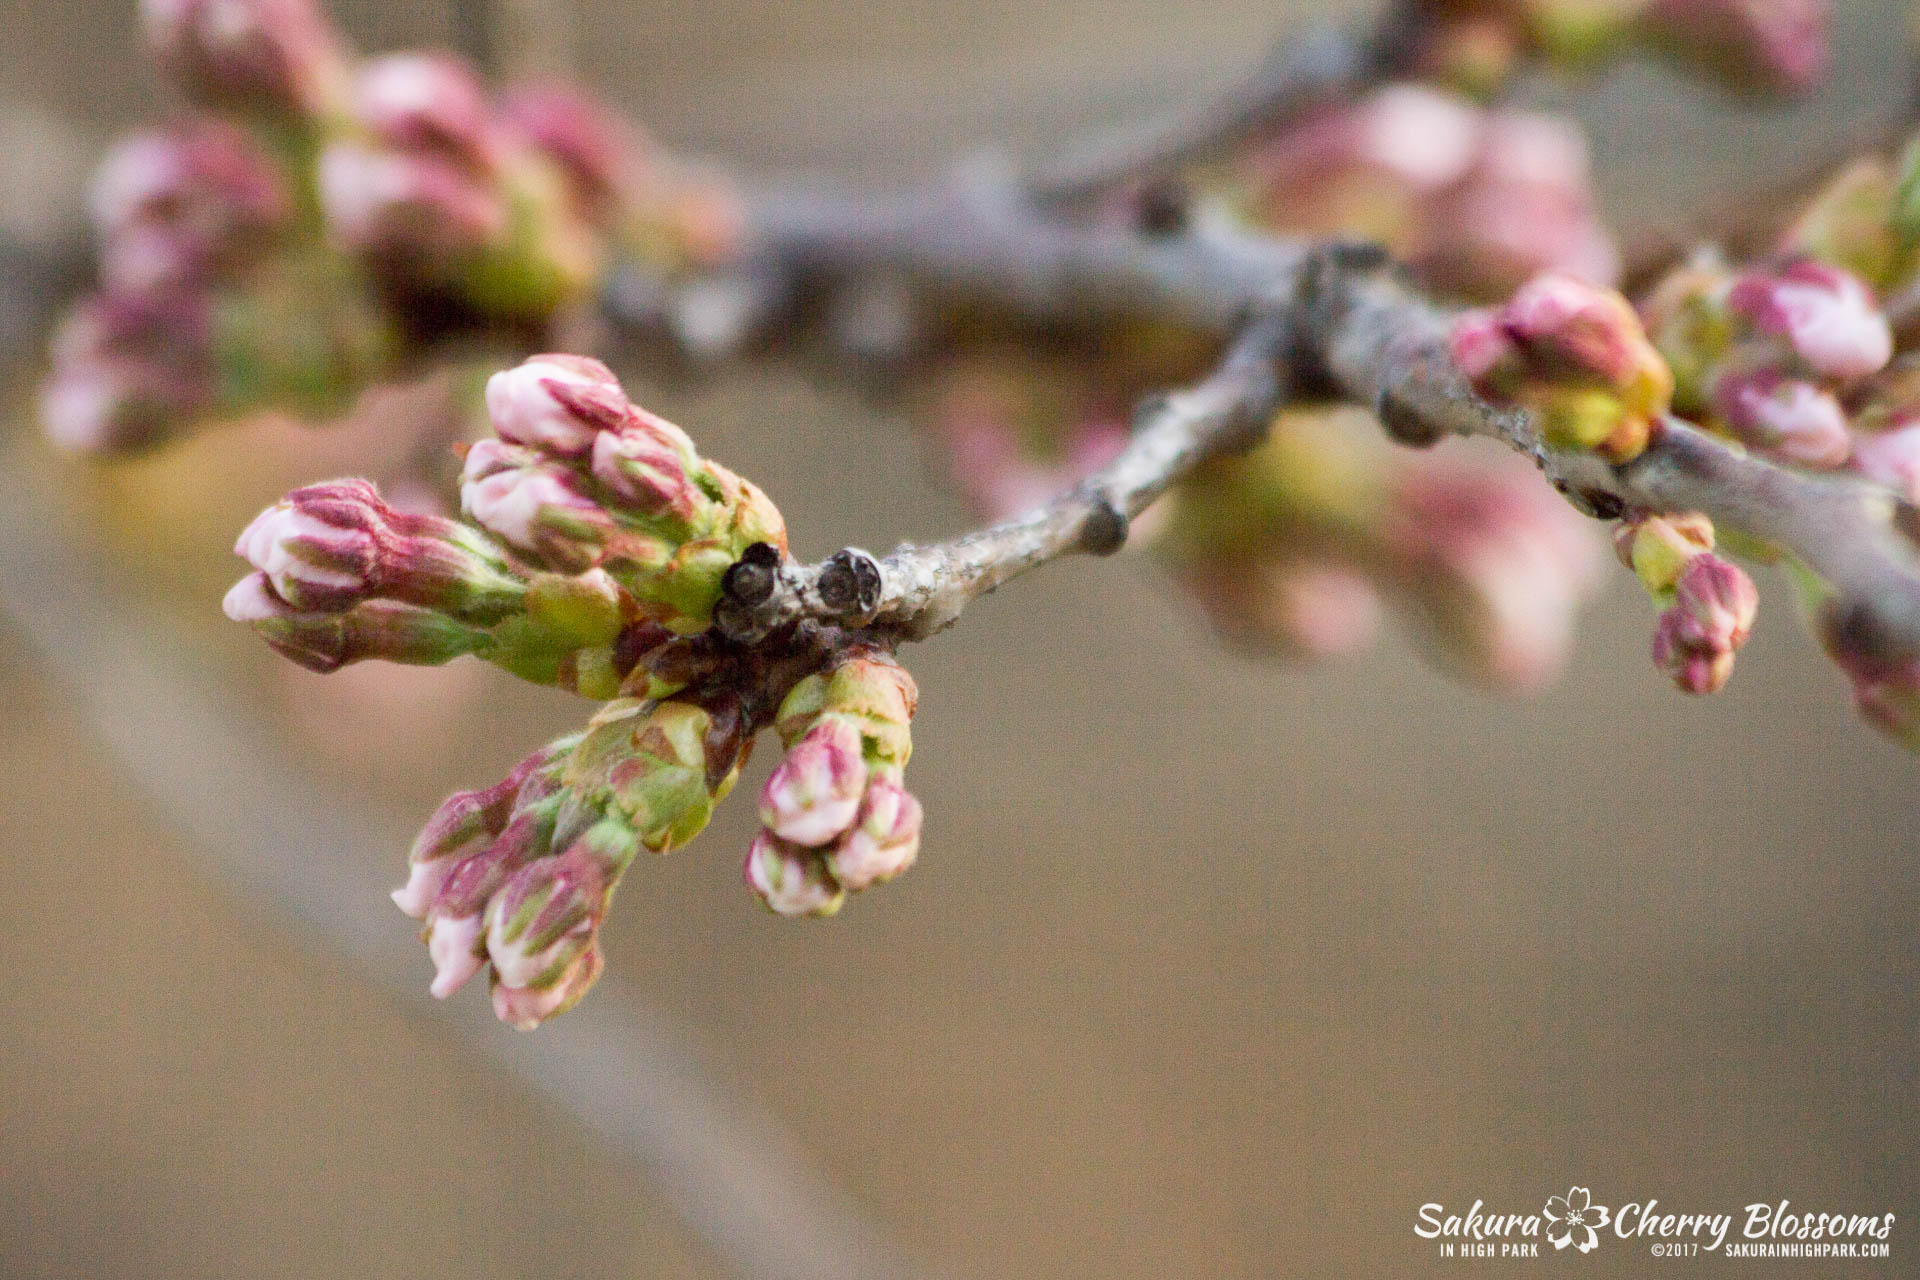 Sakura-in-High-Park-April-17-2017-florets-are-emerging-from-the-buds-throughout-the-park-25.jpg